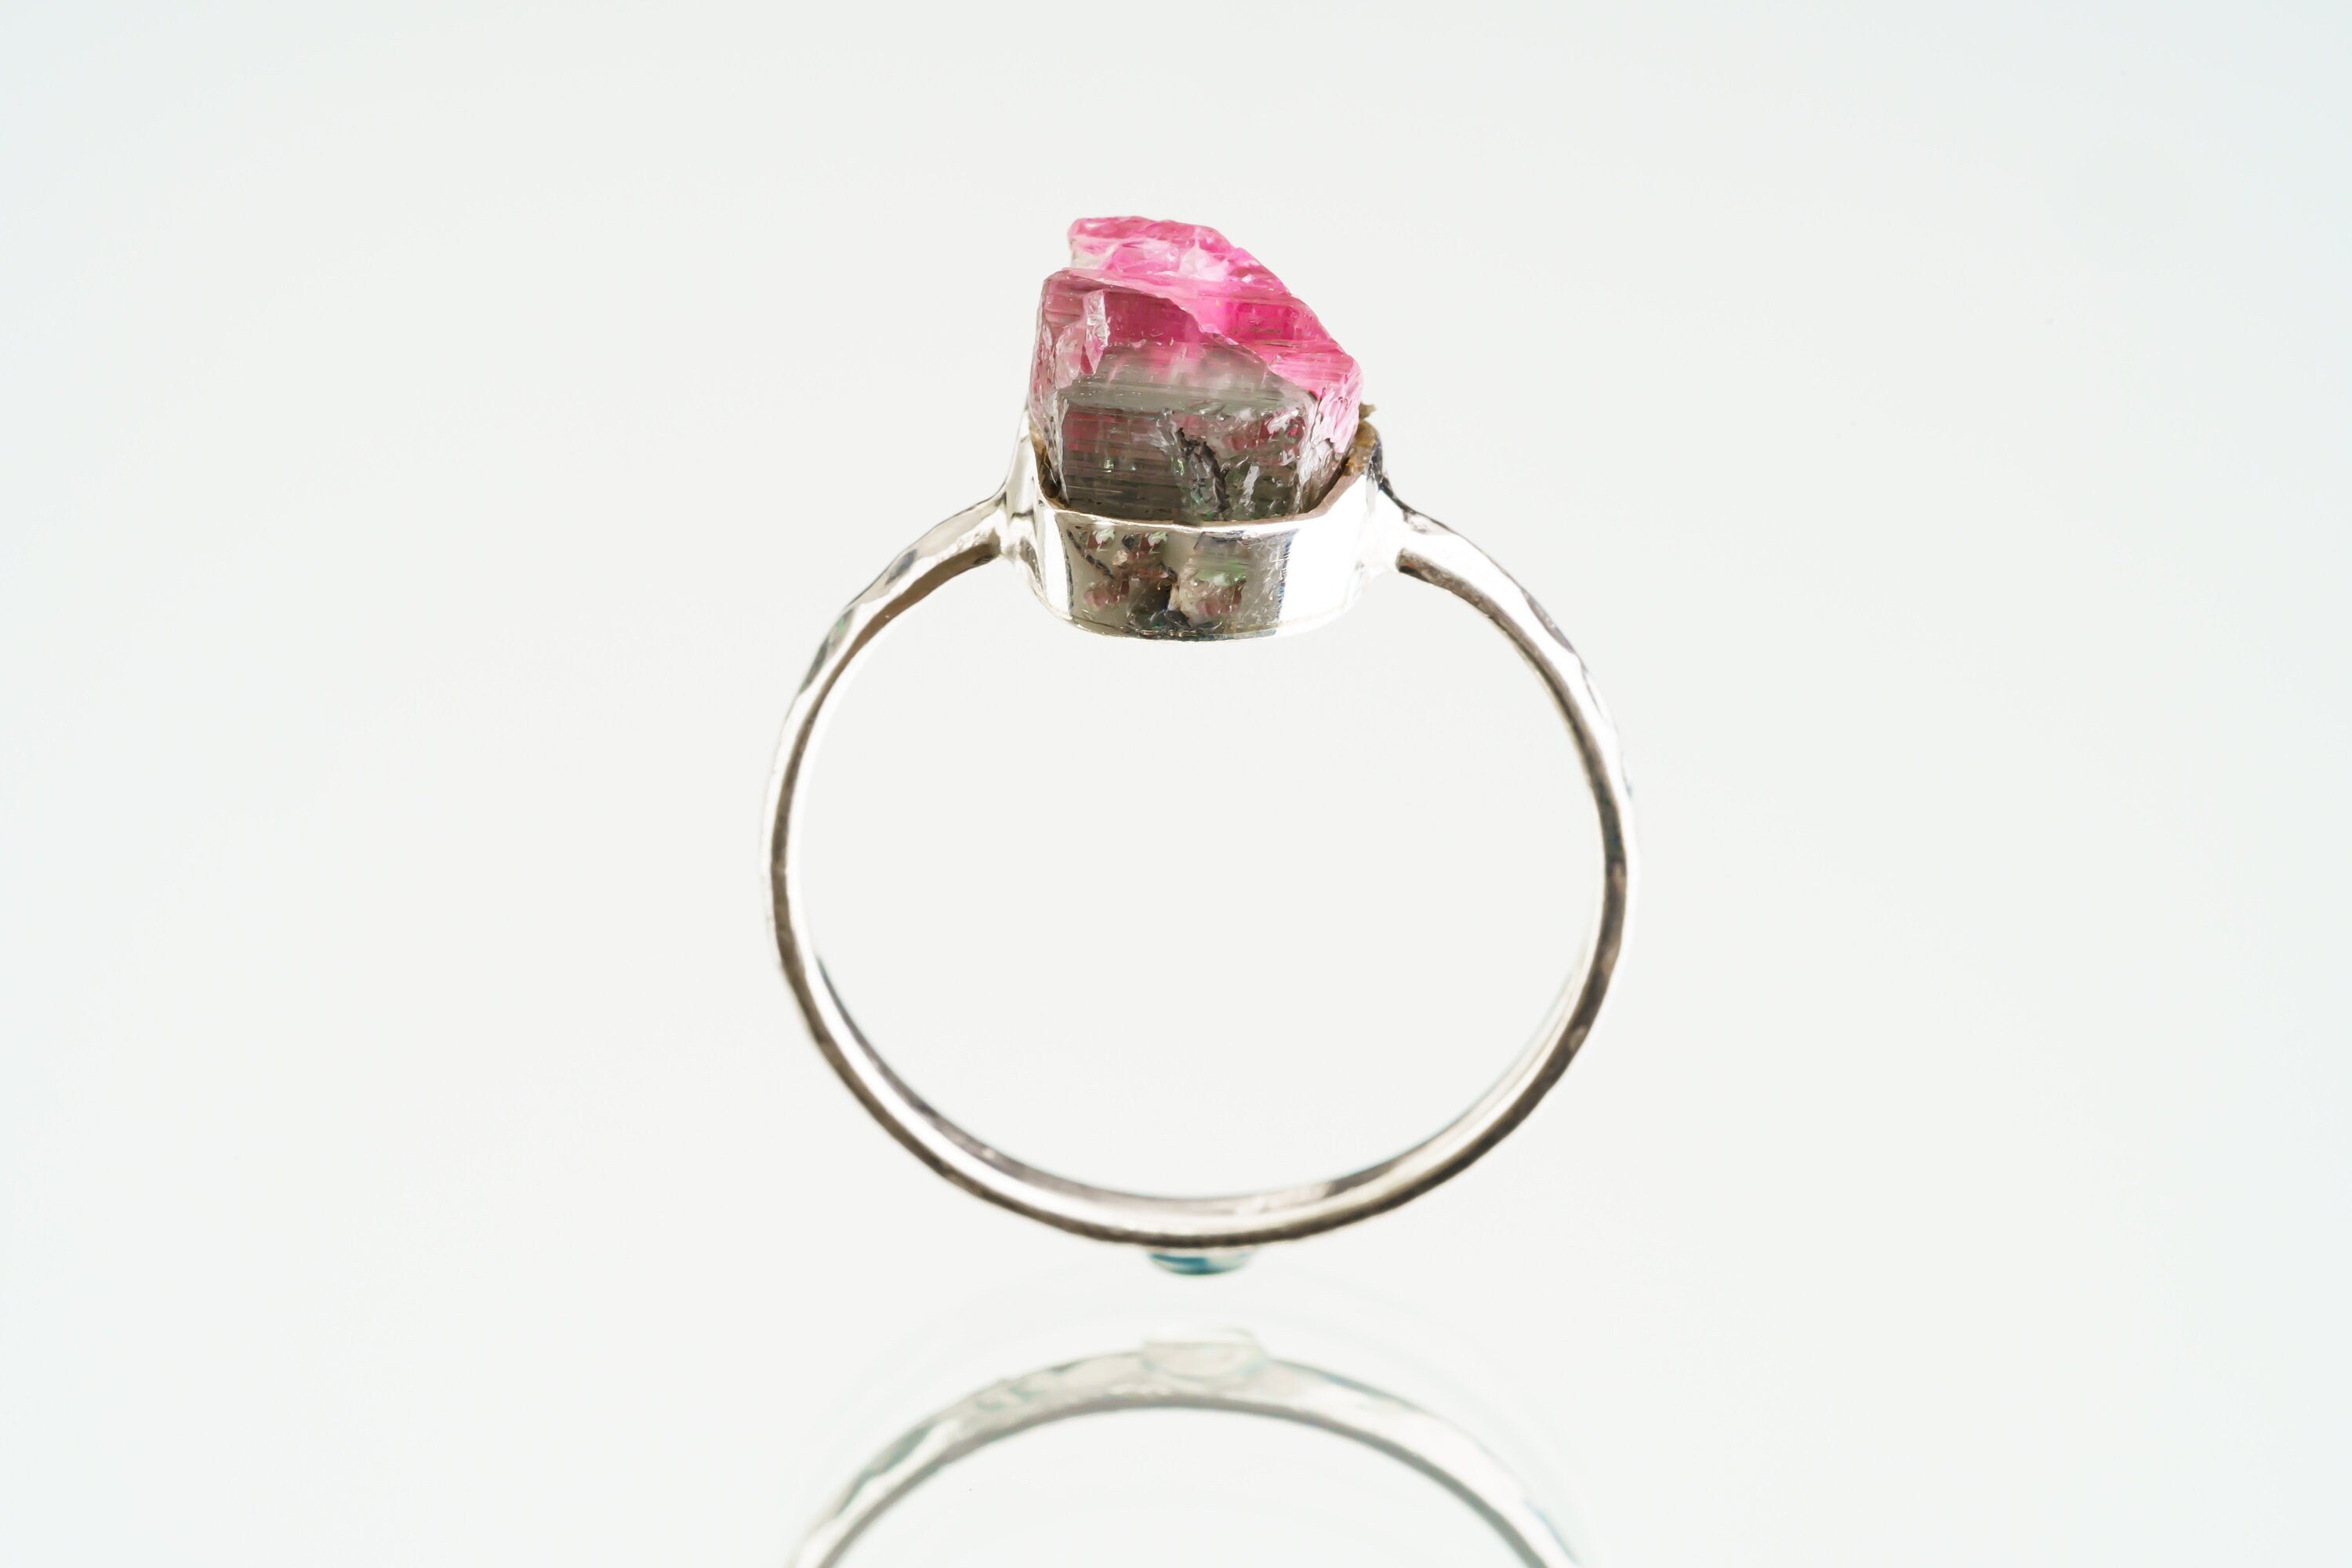 Mostly Pink Watermelon Tourmaline - Stack Crystal Ring - Size 5 3/4 US - 925 Sterling Silver - Thin Band Hammer Textured